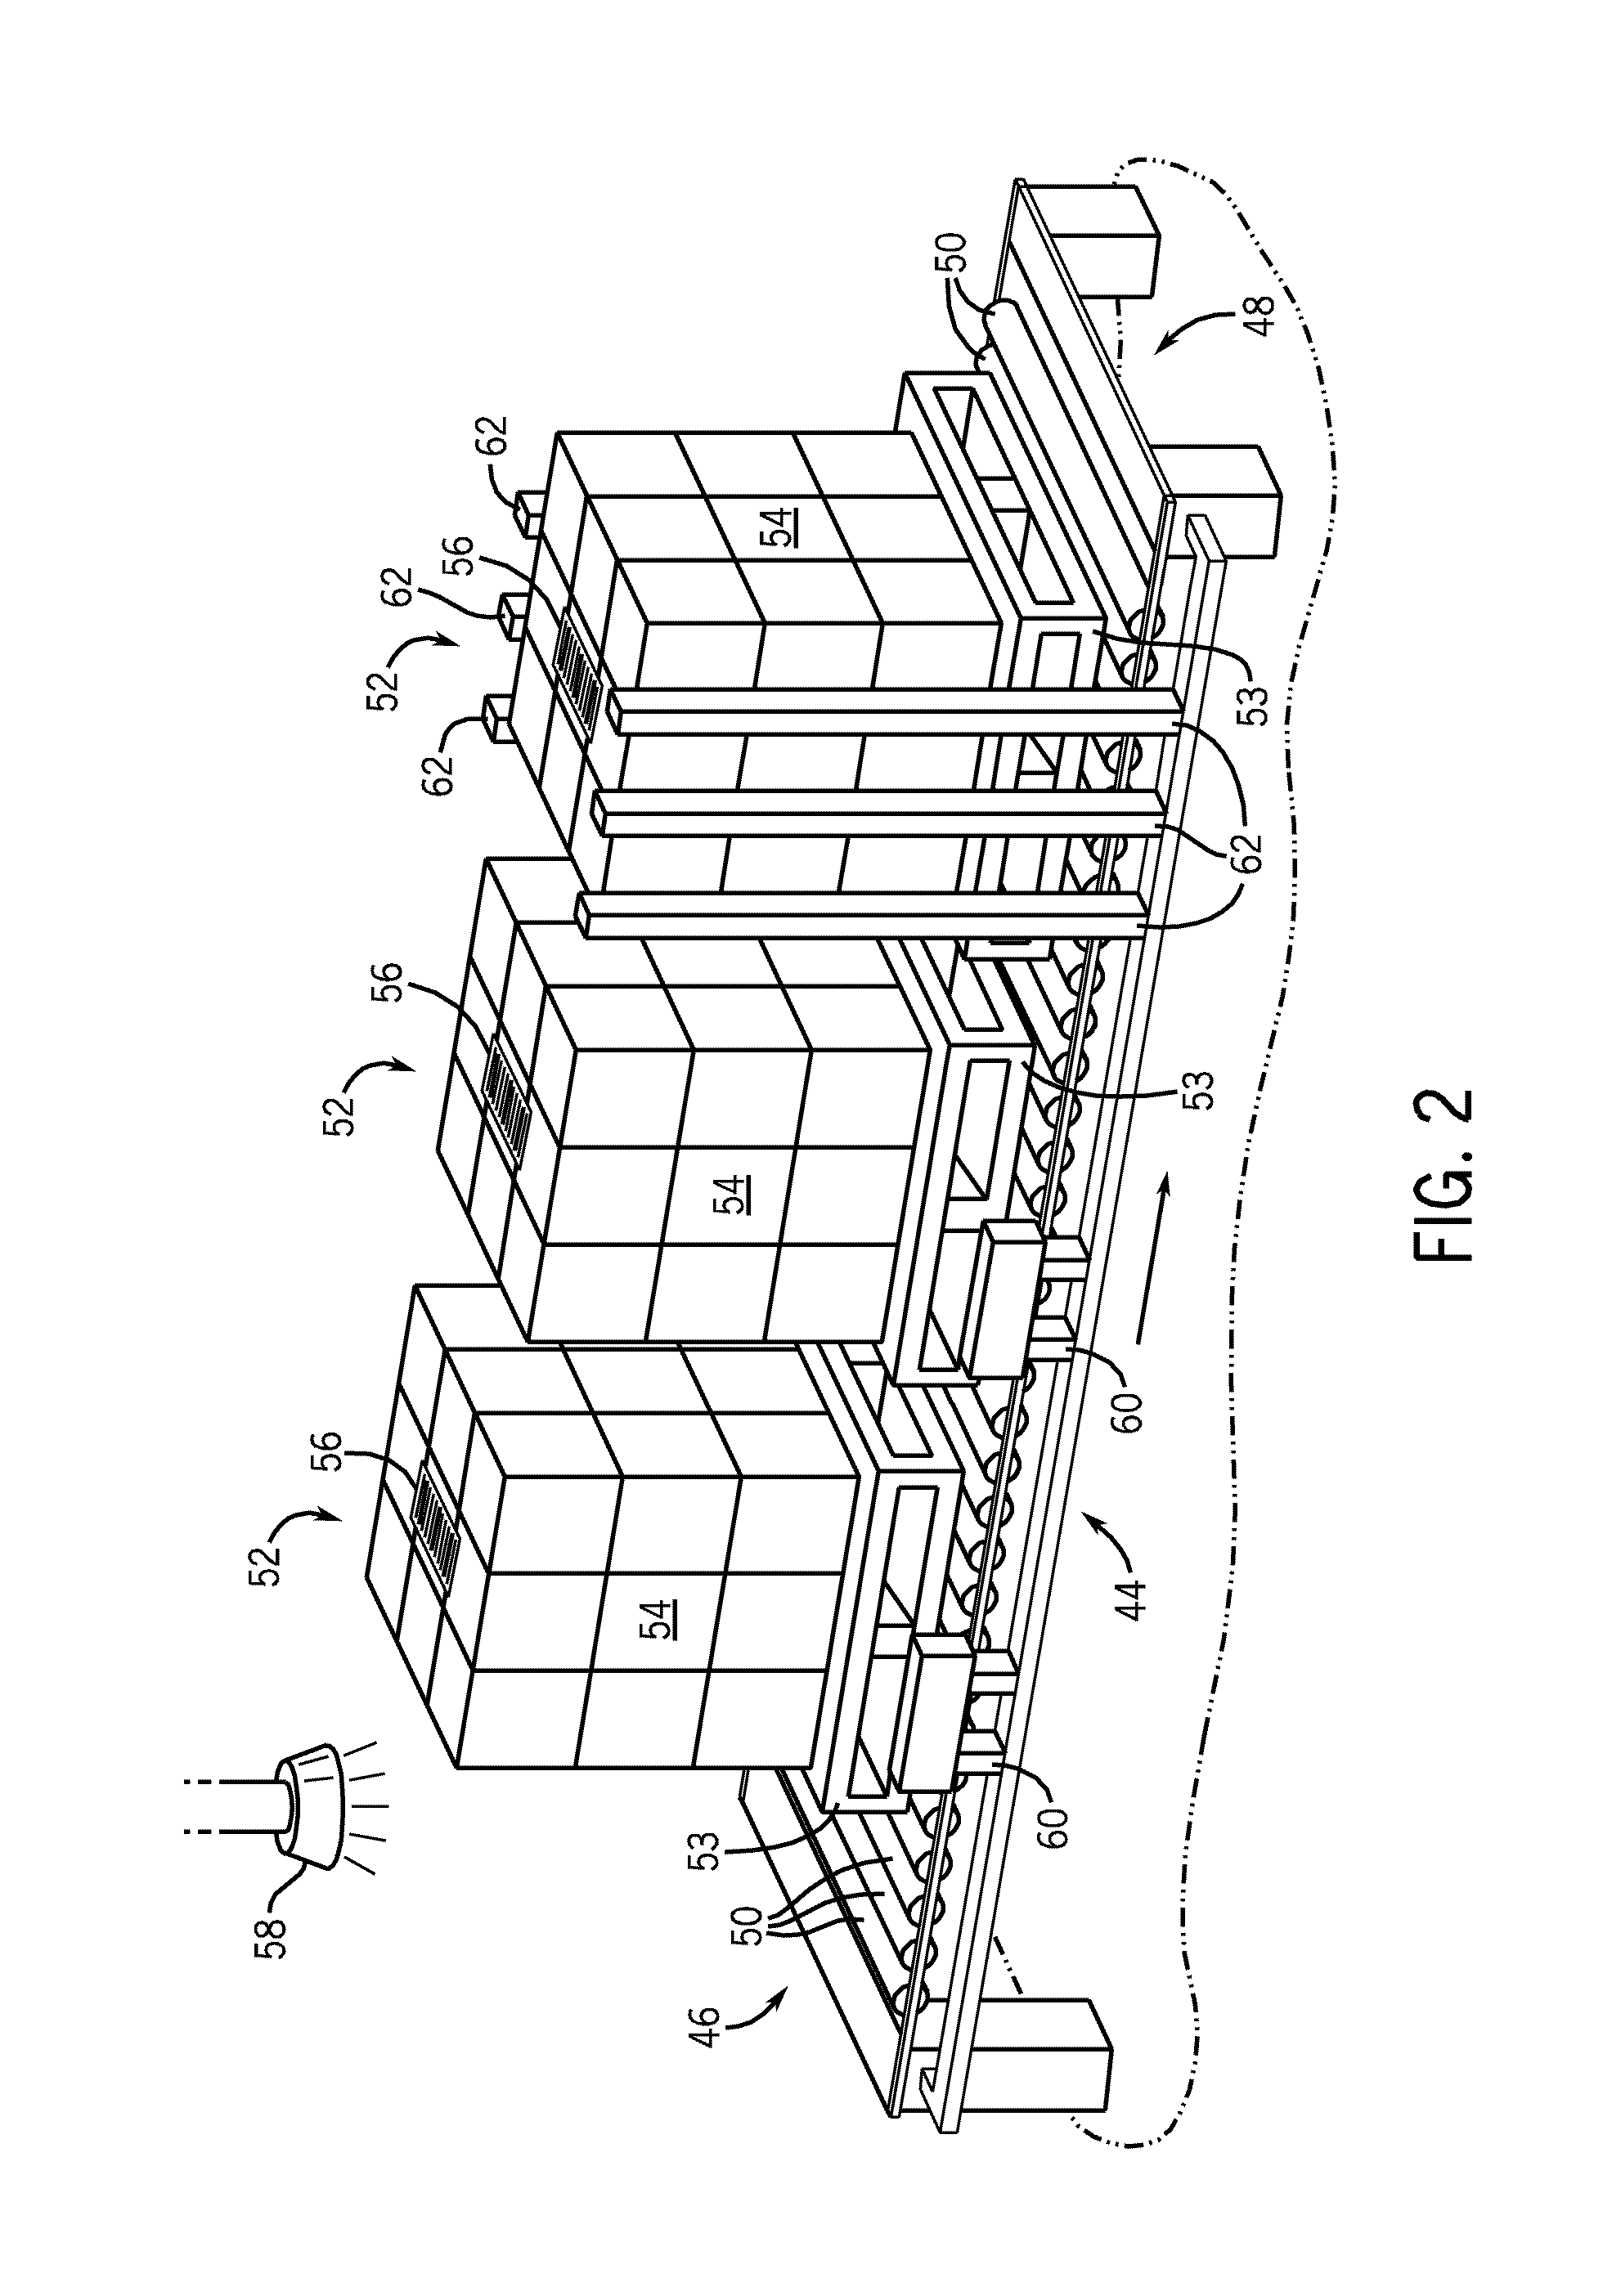 Welding inventory tracking, storing, and distribution system